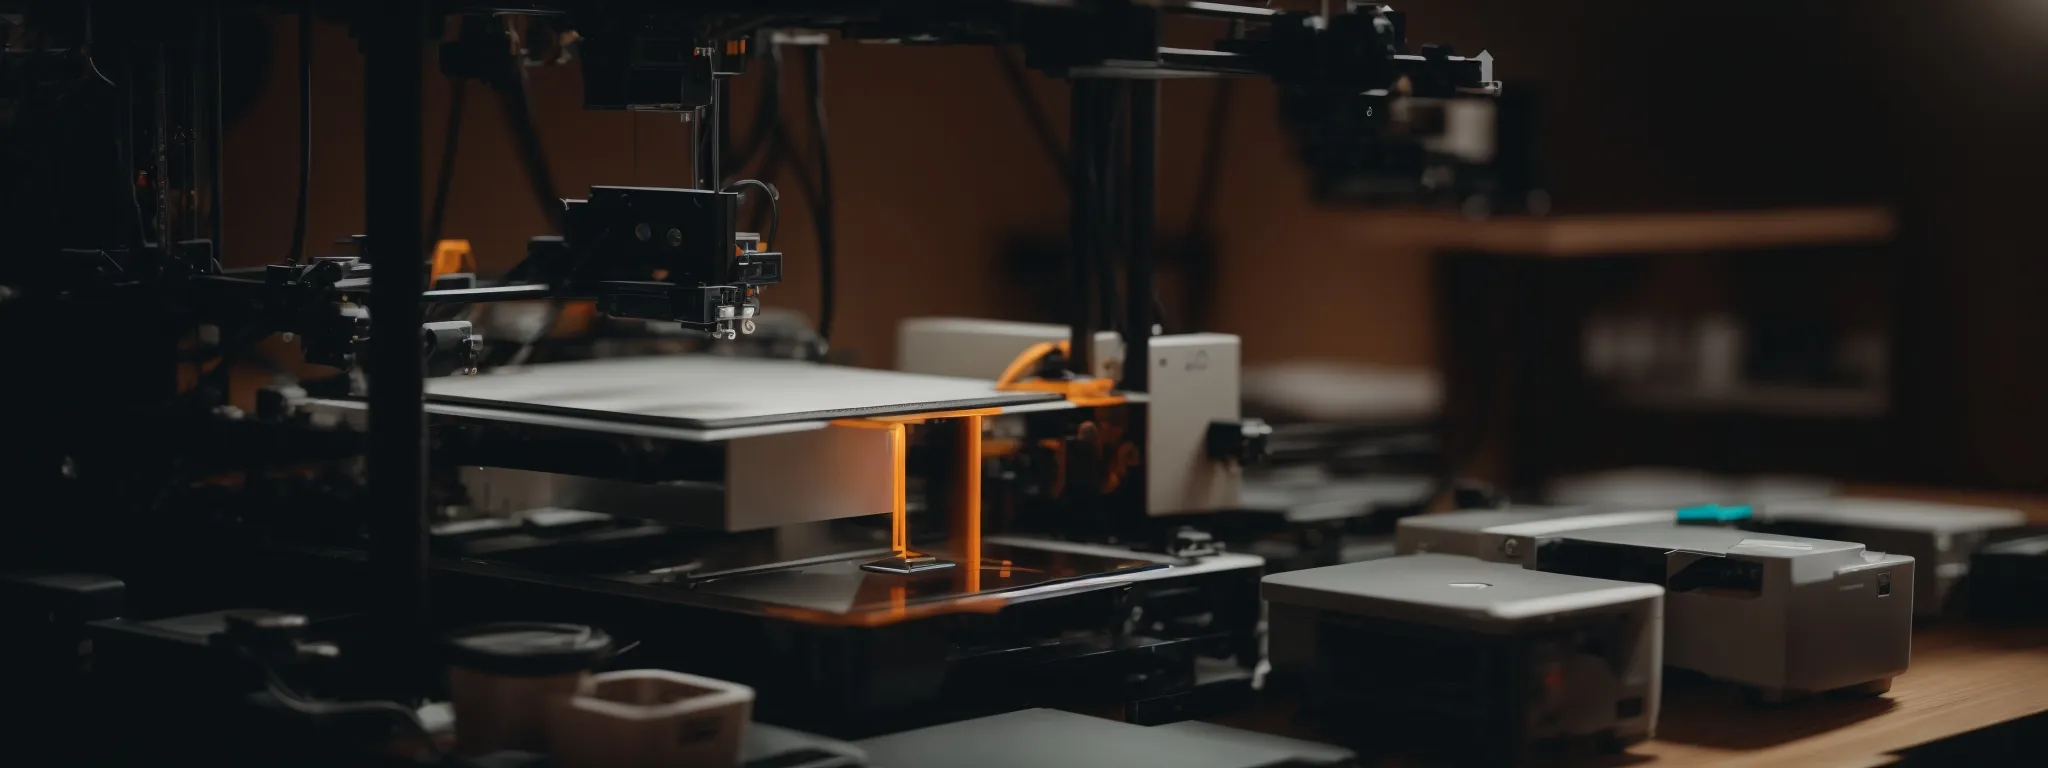 a 3d printer mid-operation, crafting a geometric object from spools of filament.